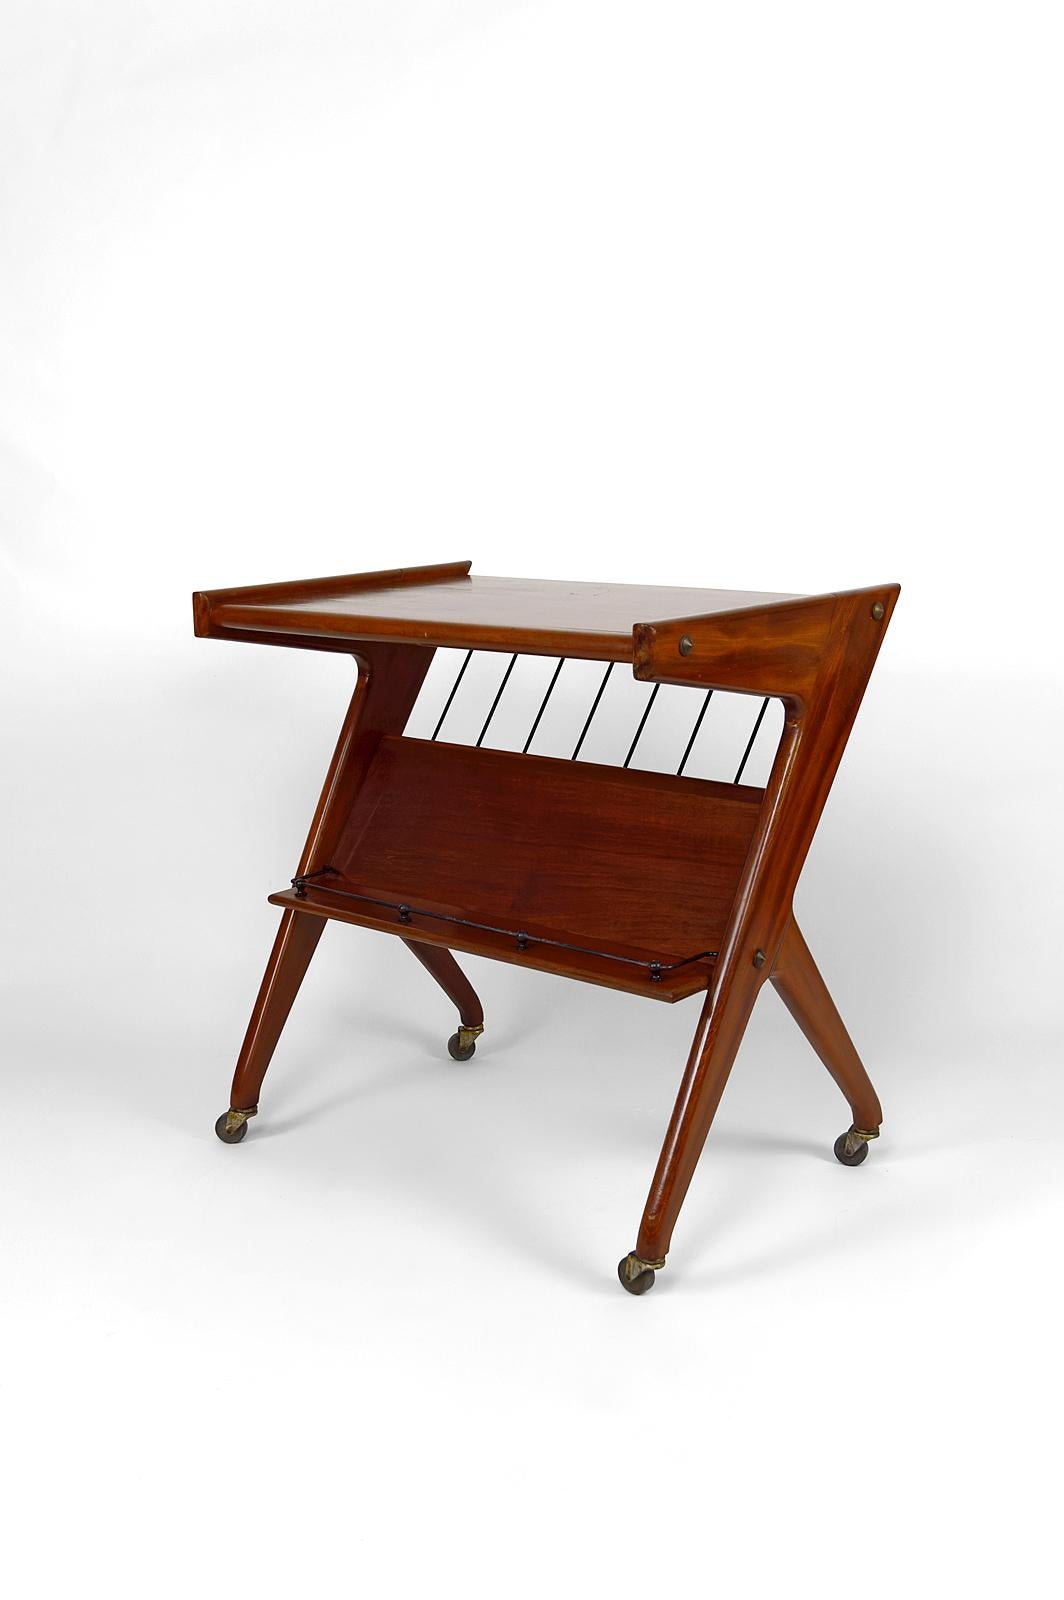 An elegant Vintage rolling table in solid teak, mounted on wheels.
Can be adapted to many uses: service table, bar cart, and magazine rack.

Mid-Century Modern Scandinavian style, Italy, circa 1950-1960.
In the style of the productions of the